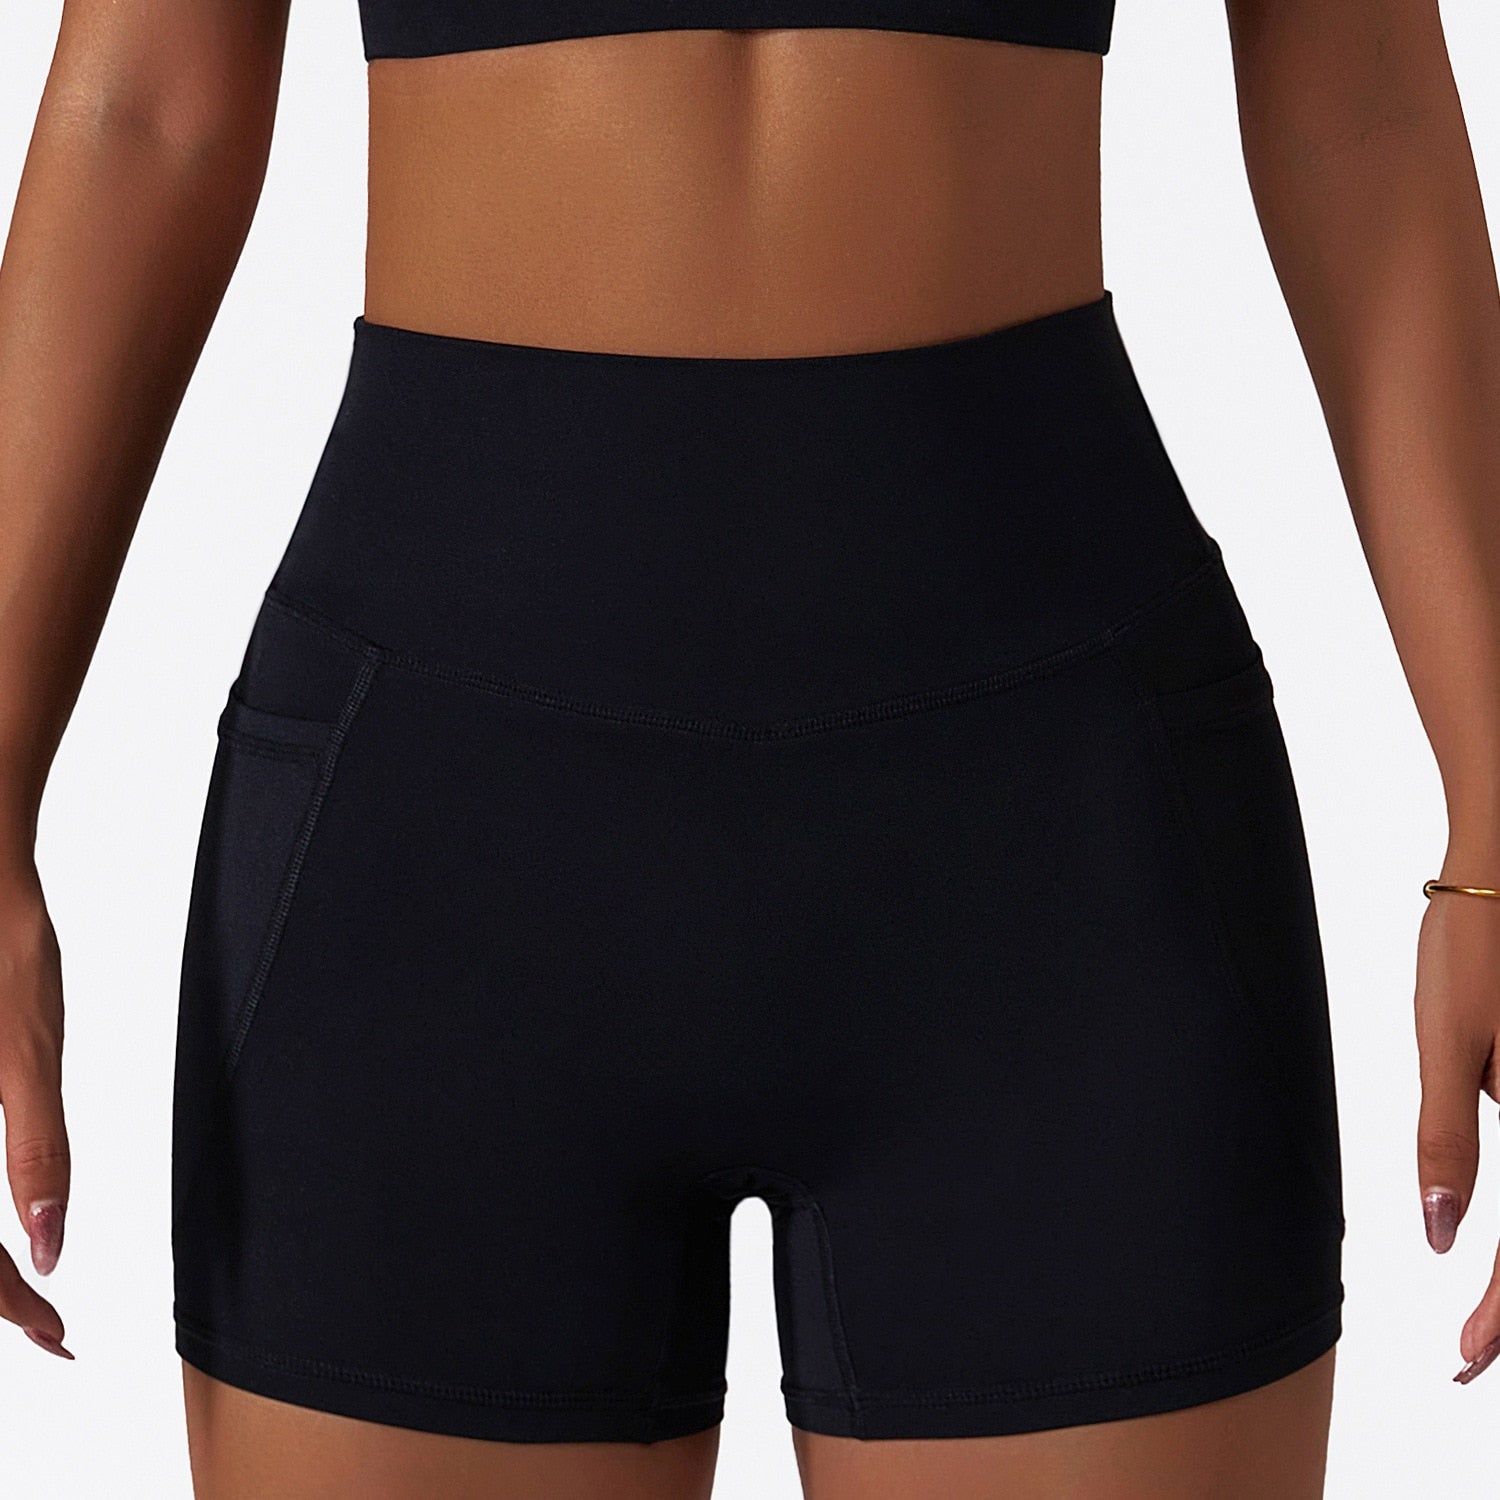 Women's Solid Black Color Seamless High Waisted Yoga Athletic Shorts With Pockets